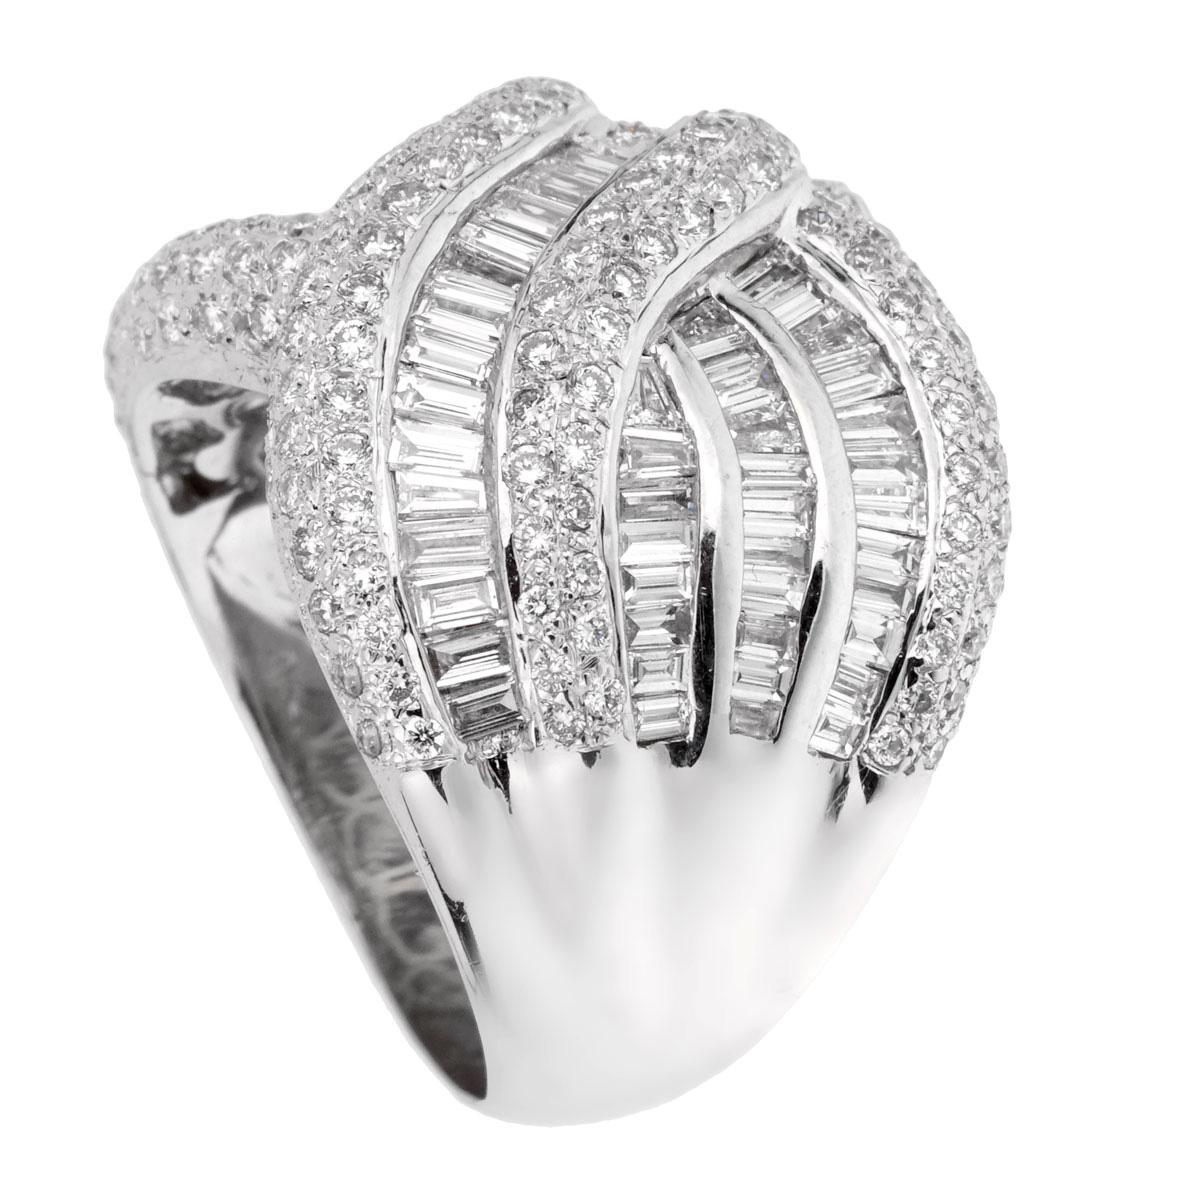 A fabulous cocktail ring set with baguette diamonds and round brilliant cut diamonds in shimmering white gold. The ring measures a size 8 and can be resized.